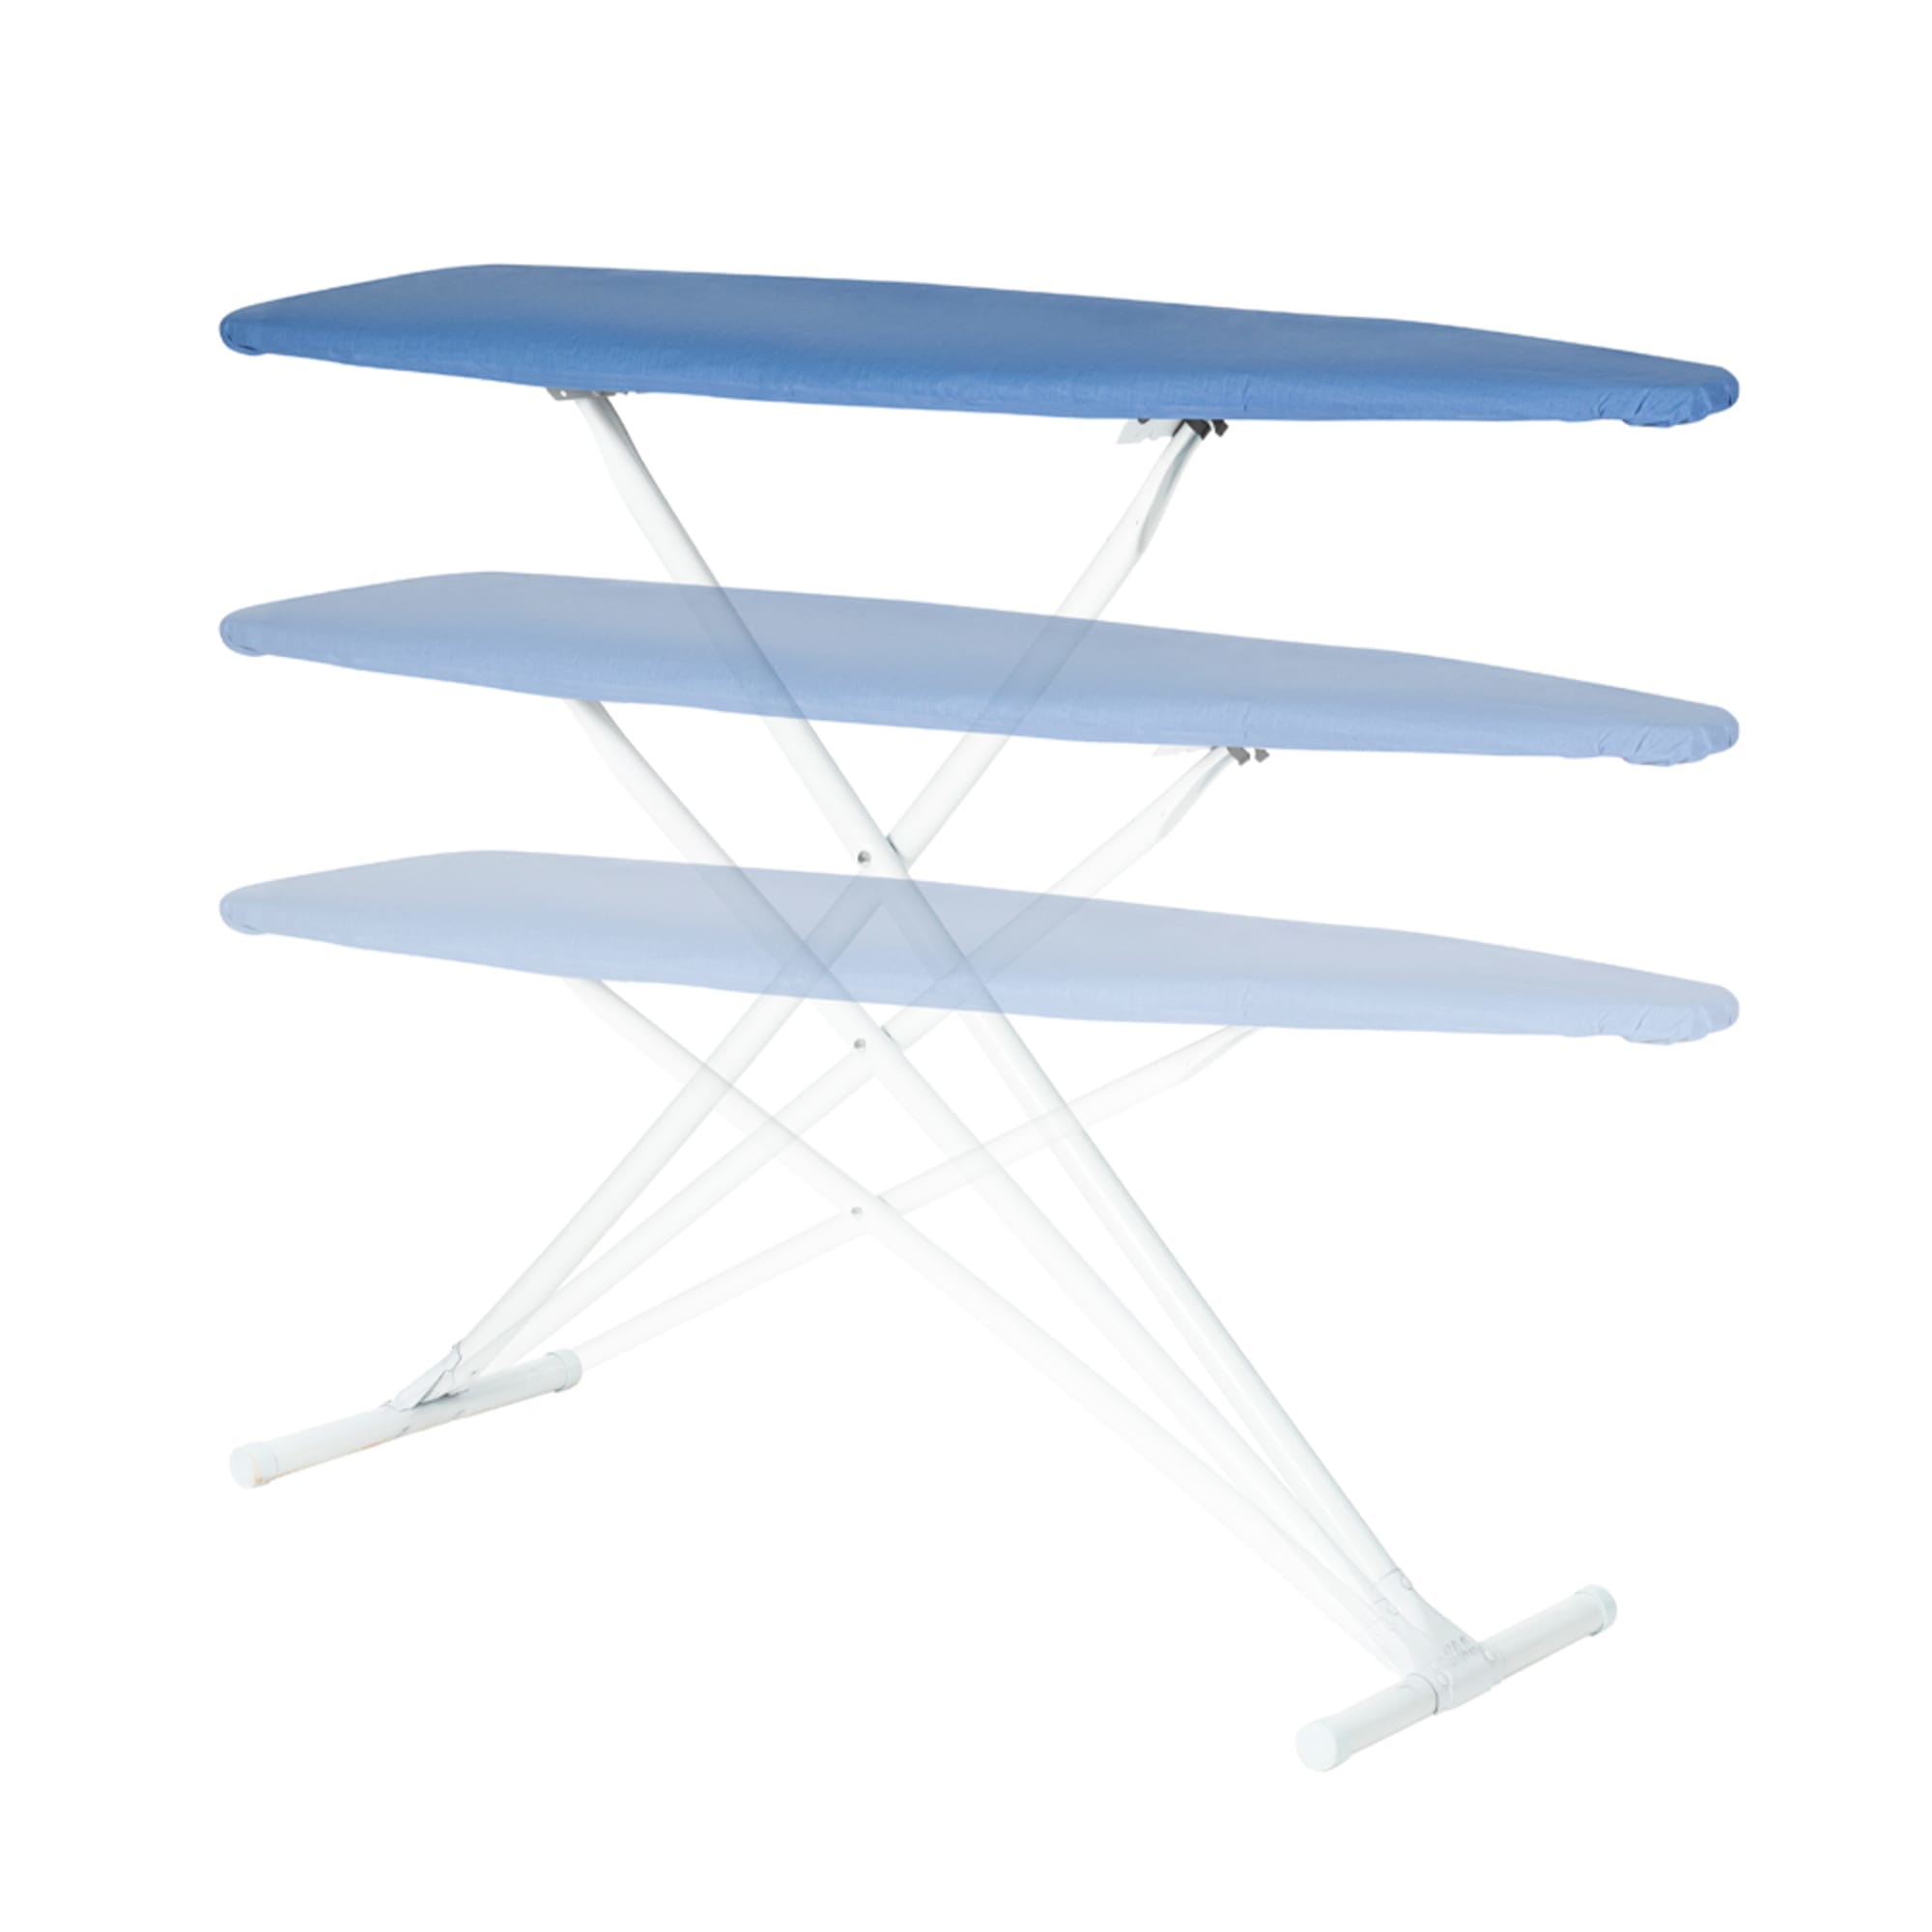 Seymour Home Products Adjustable Height, T-Leg Ironing Board With Perforated Top, Solid Blue (4 Pack) $25.00 EACH, CASE PACK OF 4